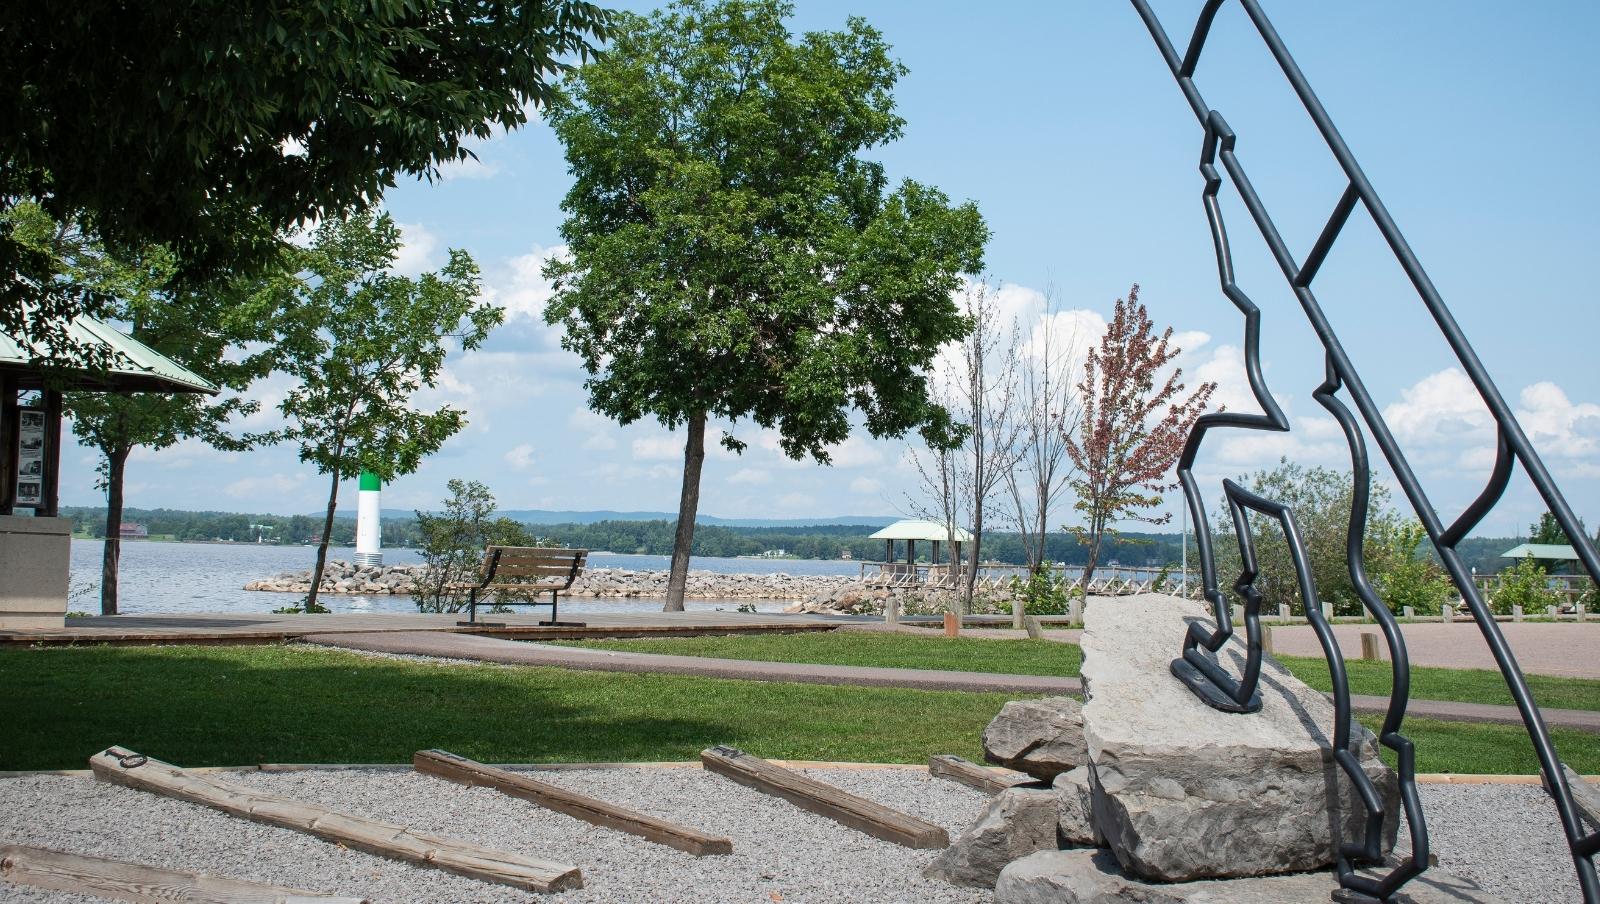 The Pembroke Waterfront. A sundial overlooks a boardwalk, which sits in front of the Ottawa River.